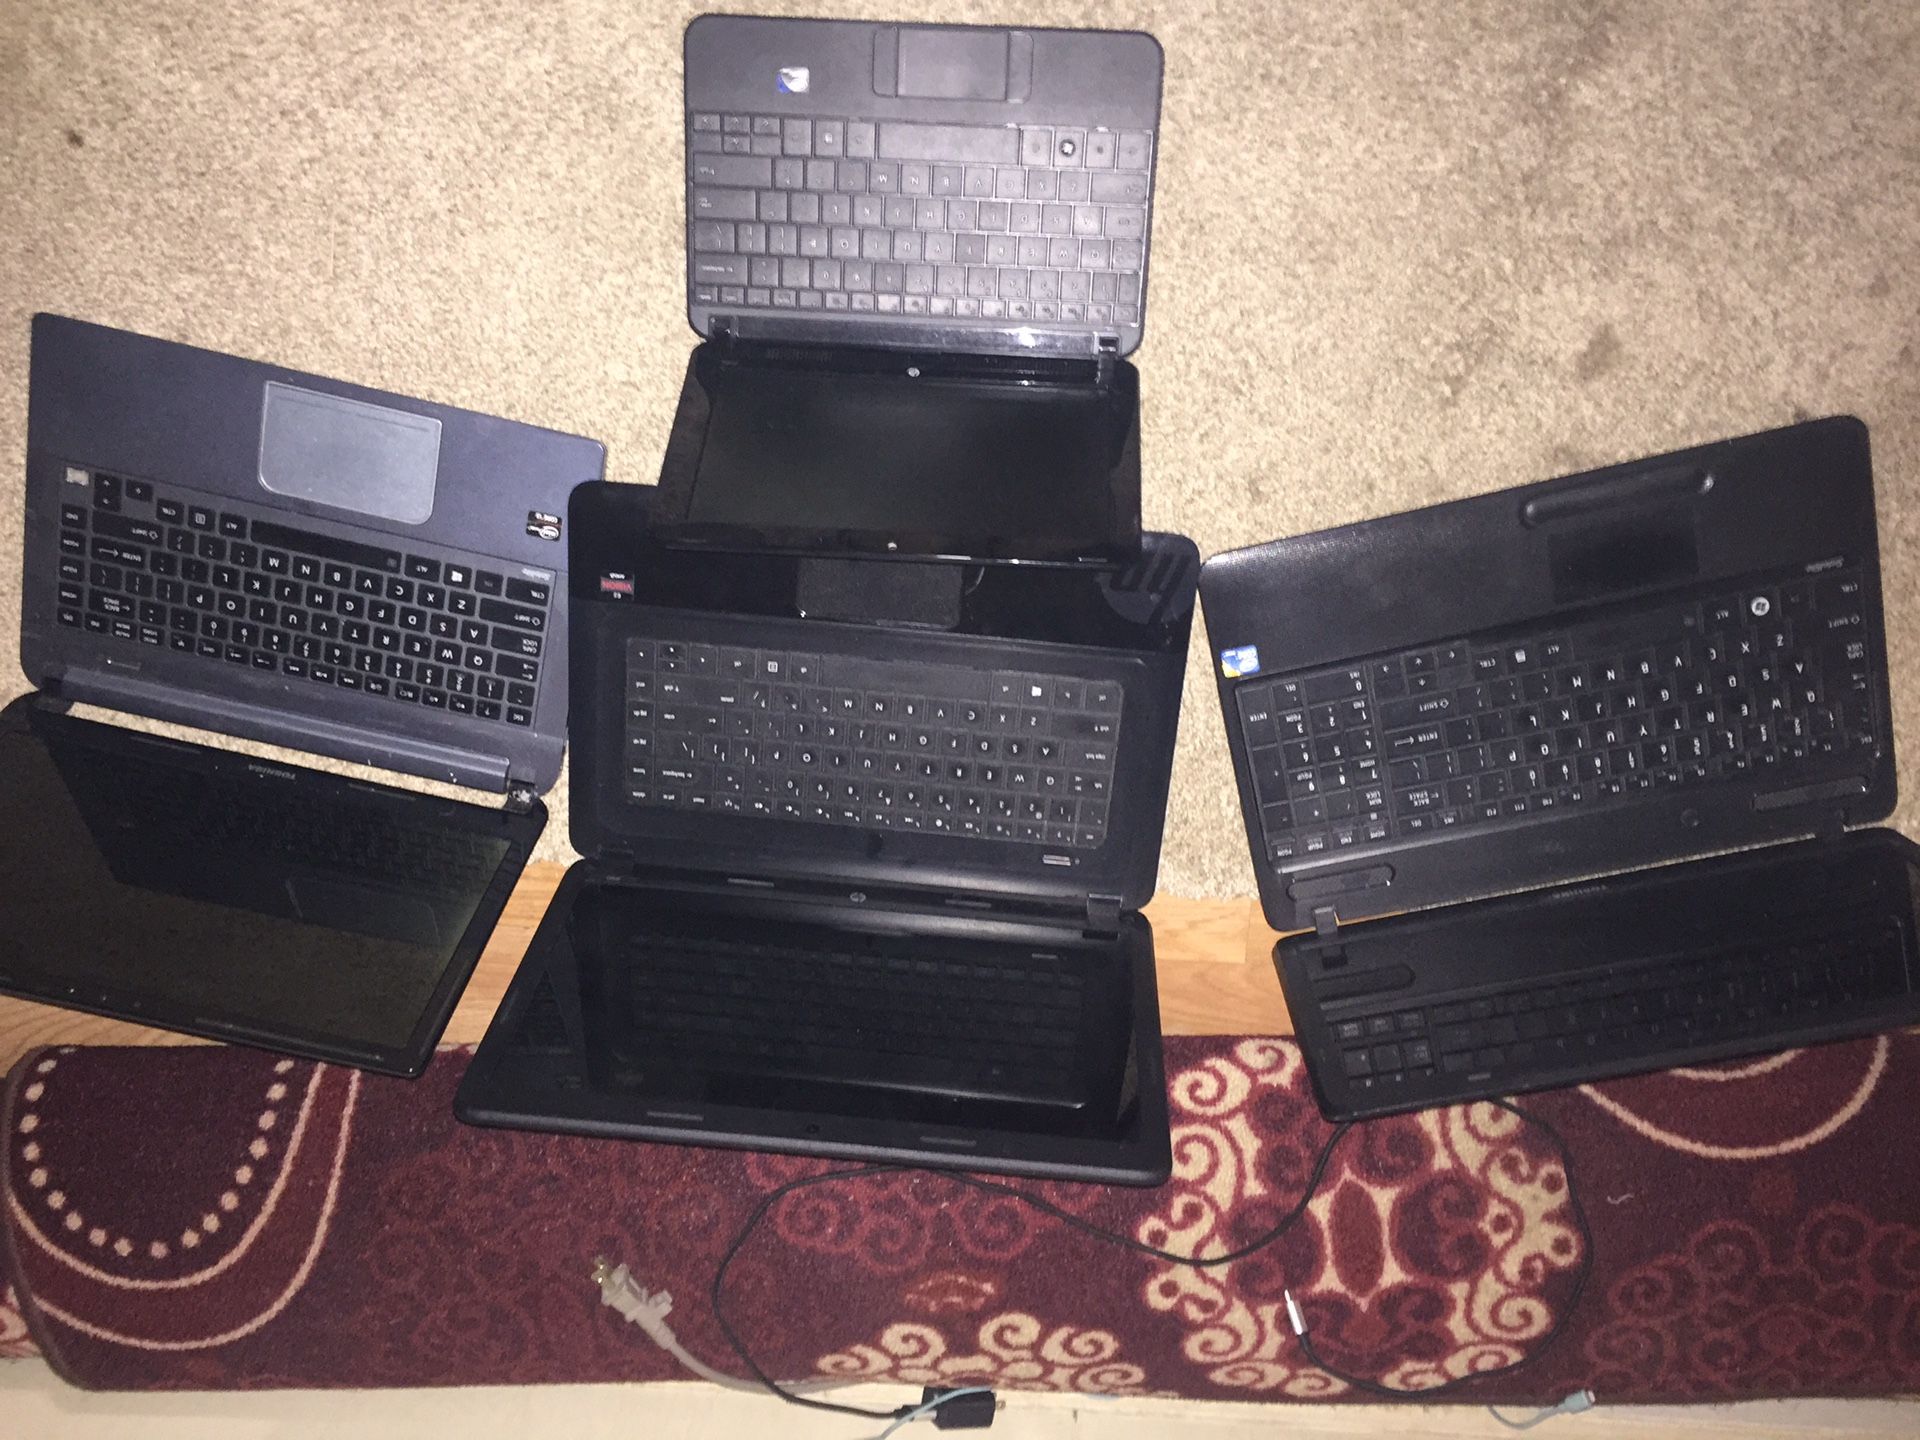 Two toshibas/two hp laptops